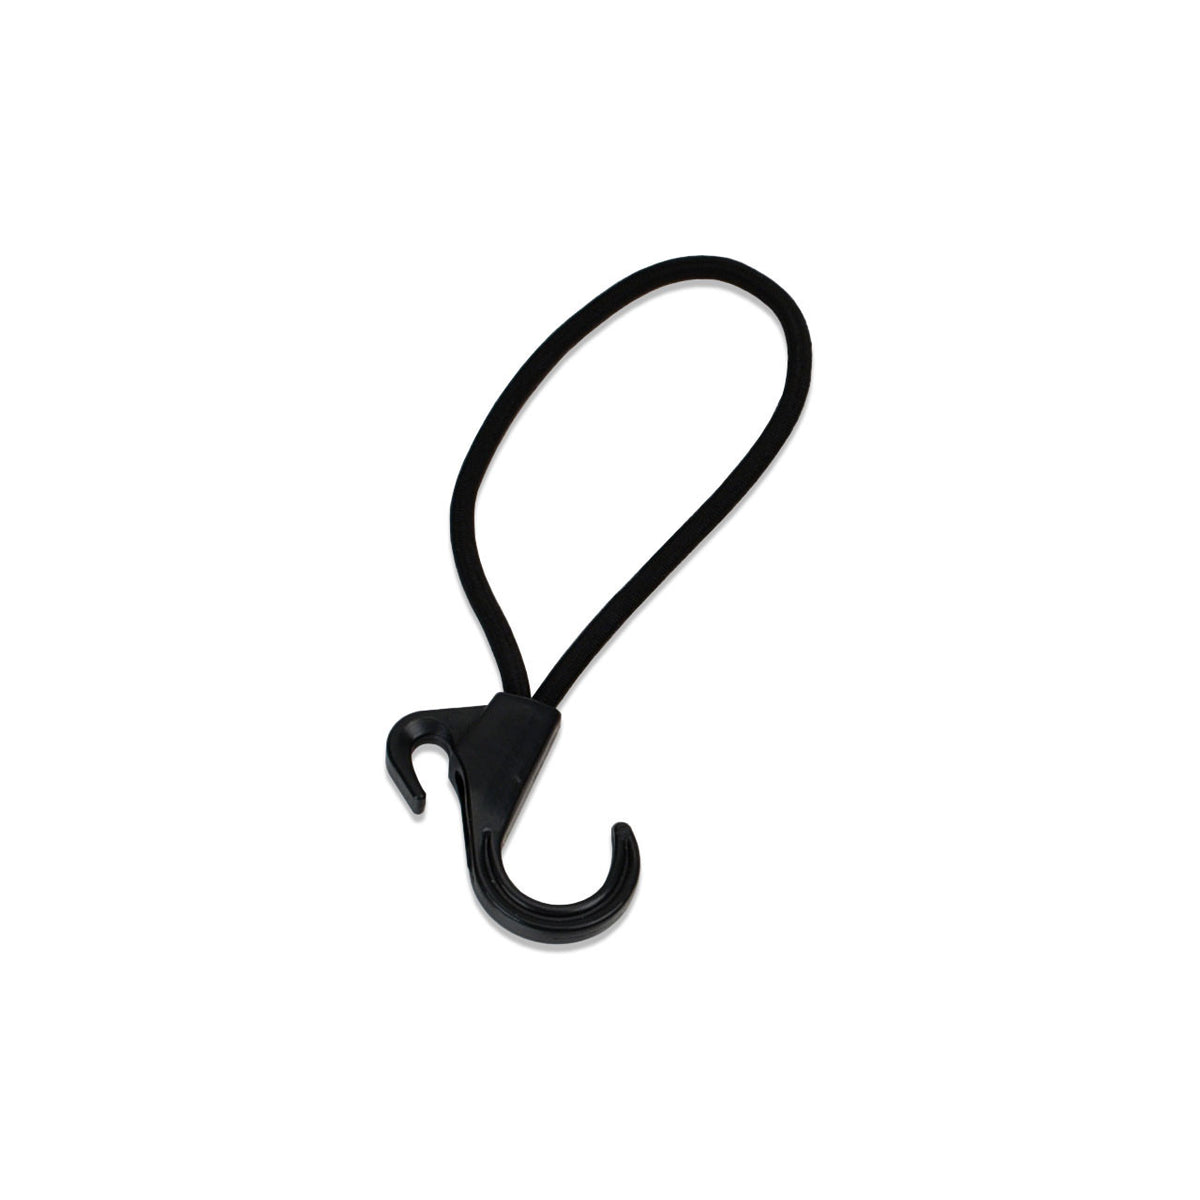 IAG Replacement Black Bungee Cord with Hook (1) for IAG EZ-Lift Soft Top Assist System